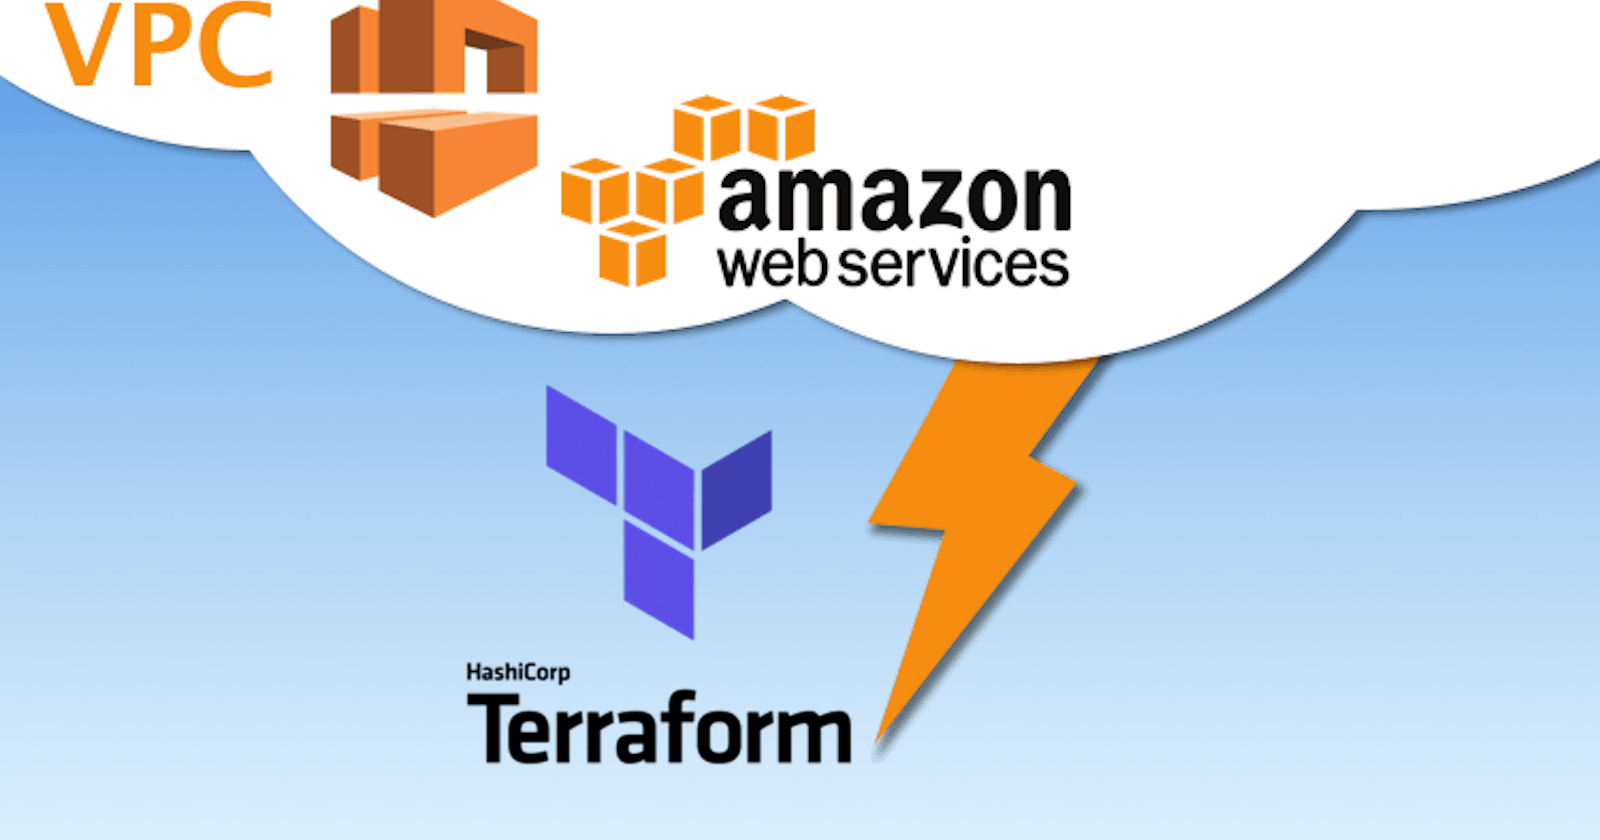 Automate AWS services using Terraform, and build a fully secured Web App